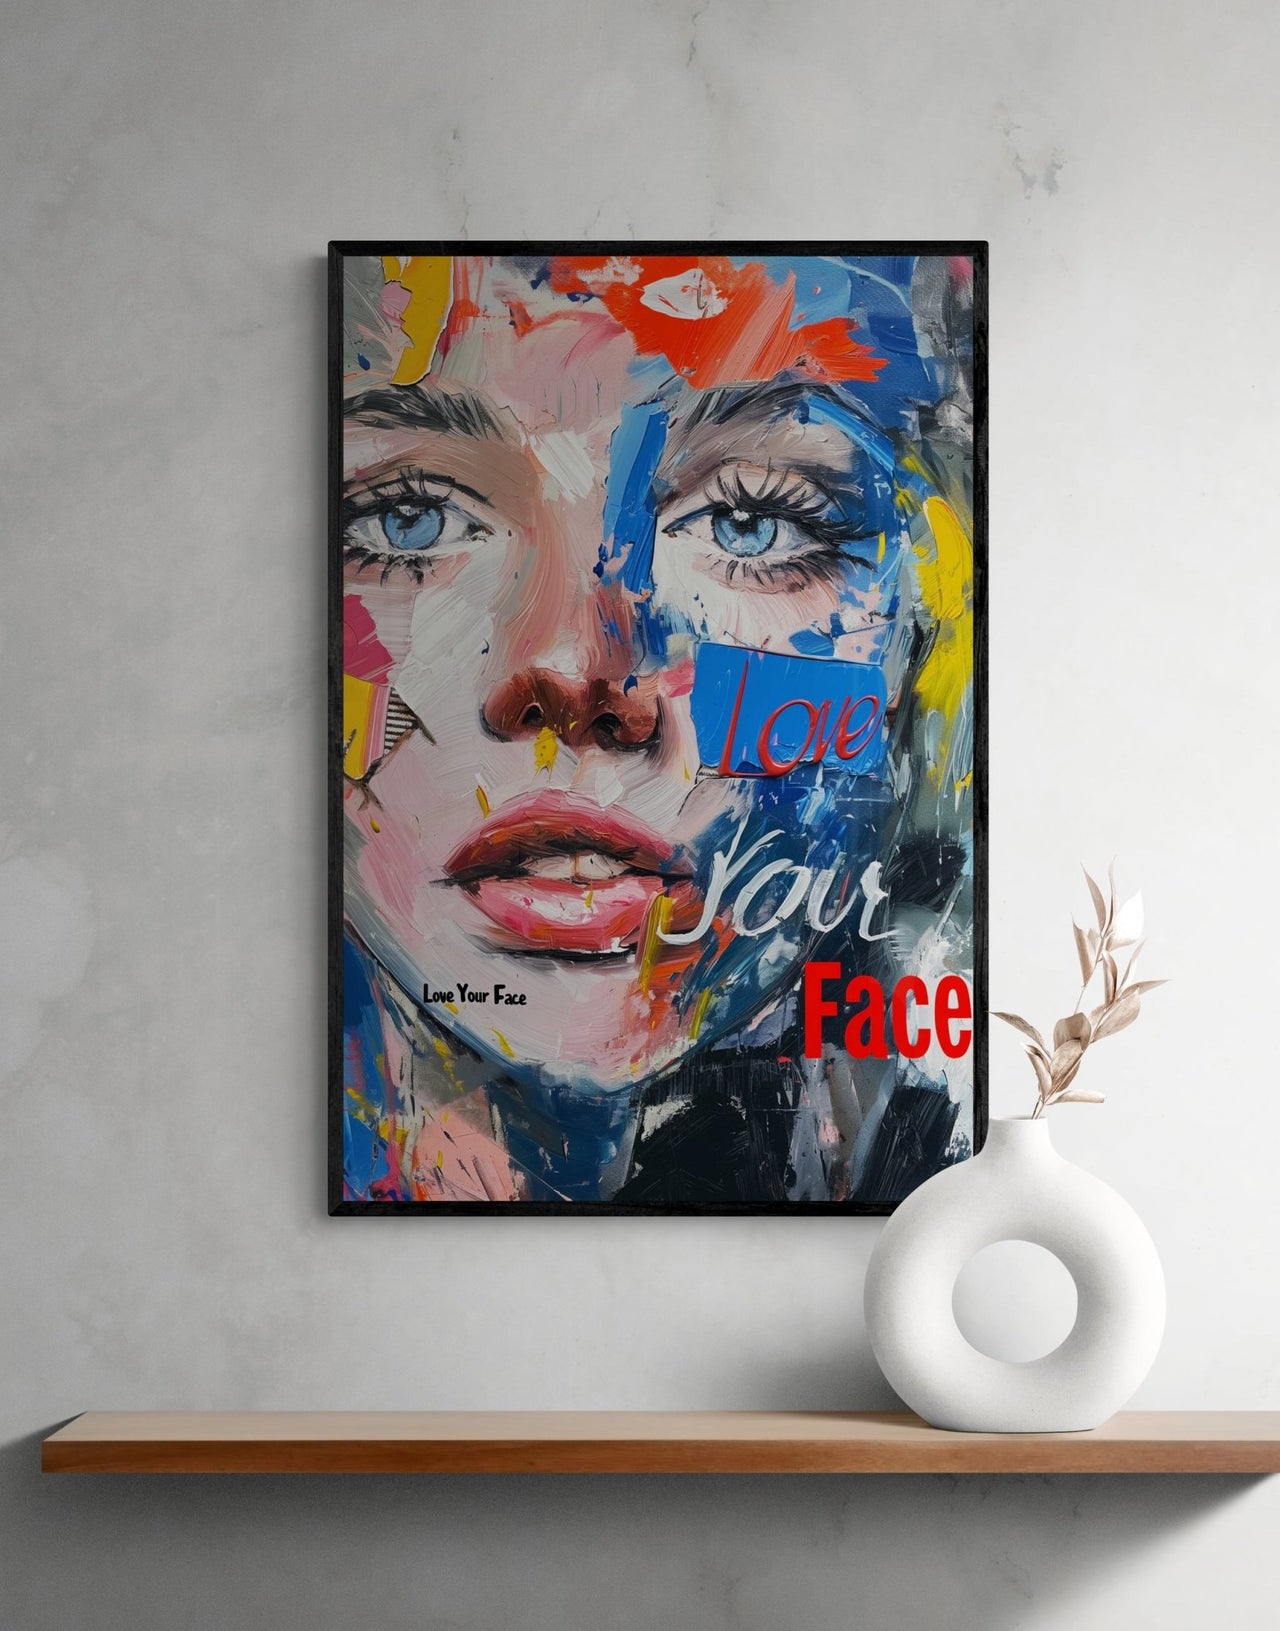 Expressive and colorful framed canvas art piece titled 'Love Your Face' with a vivid, abstract portrait from Milton Wes Art, adorning a minimalist space, available at miltonwesart.com, Harlem NYC